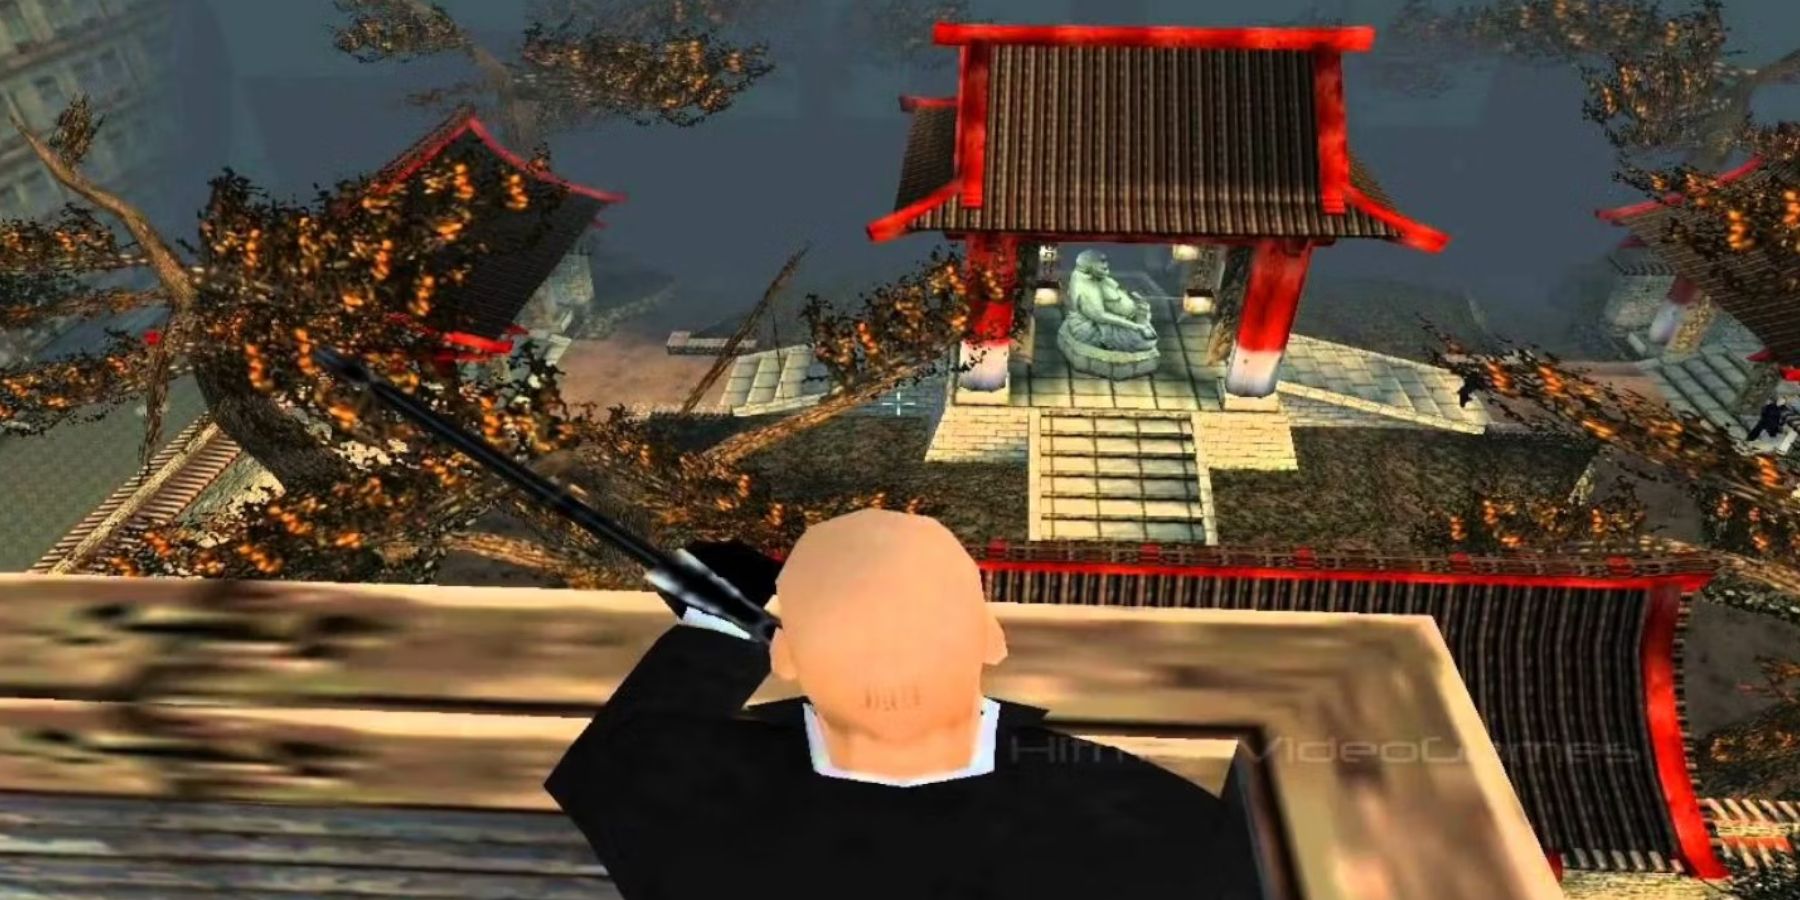 Hitman Agent 47 waiting for his target in Japanese garden